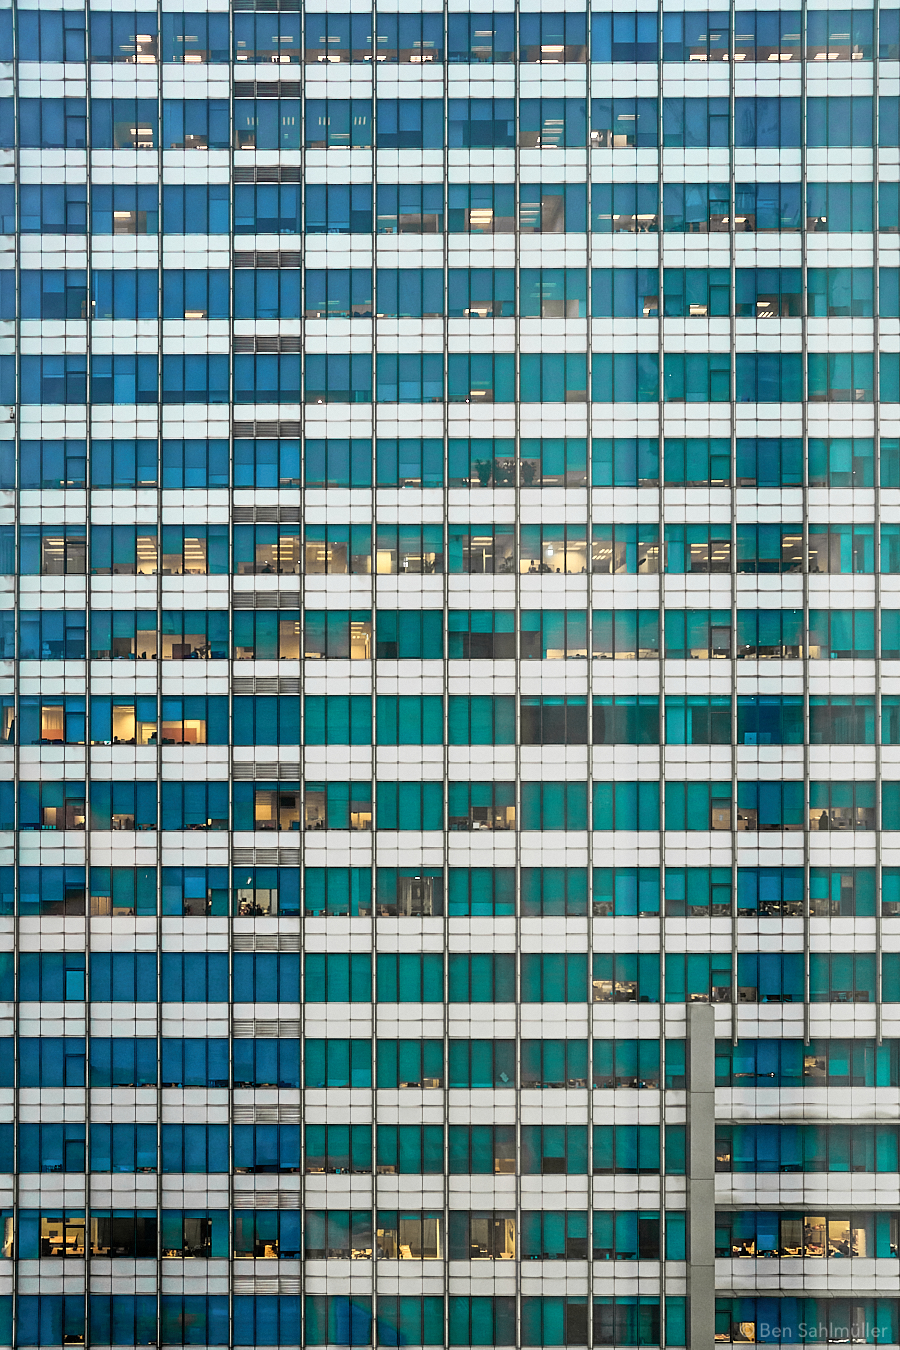 The side of an office building. A lot of glass and steel. Most of the blinds are closed, yet there is light behind the few that are still open. The offices behind look similar yet different in small ways. The silhouettes of people can be seen, all with similar jobs that are yet different in small ways.